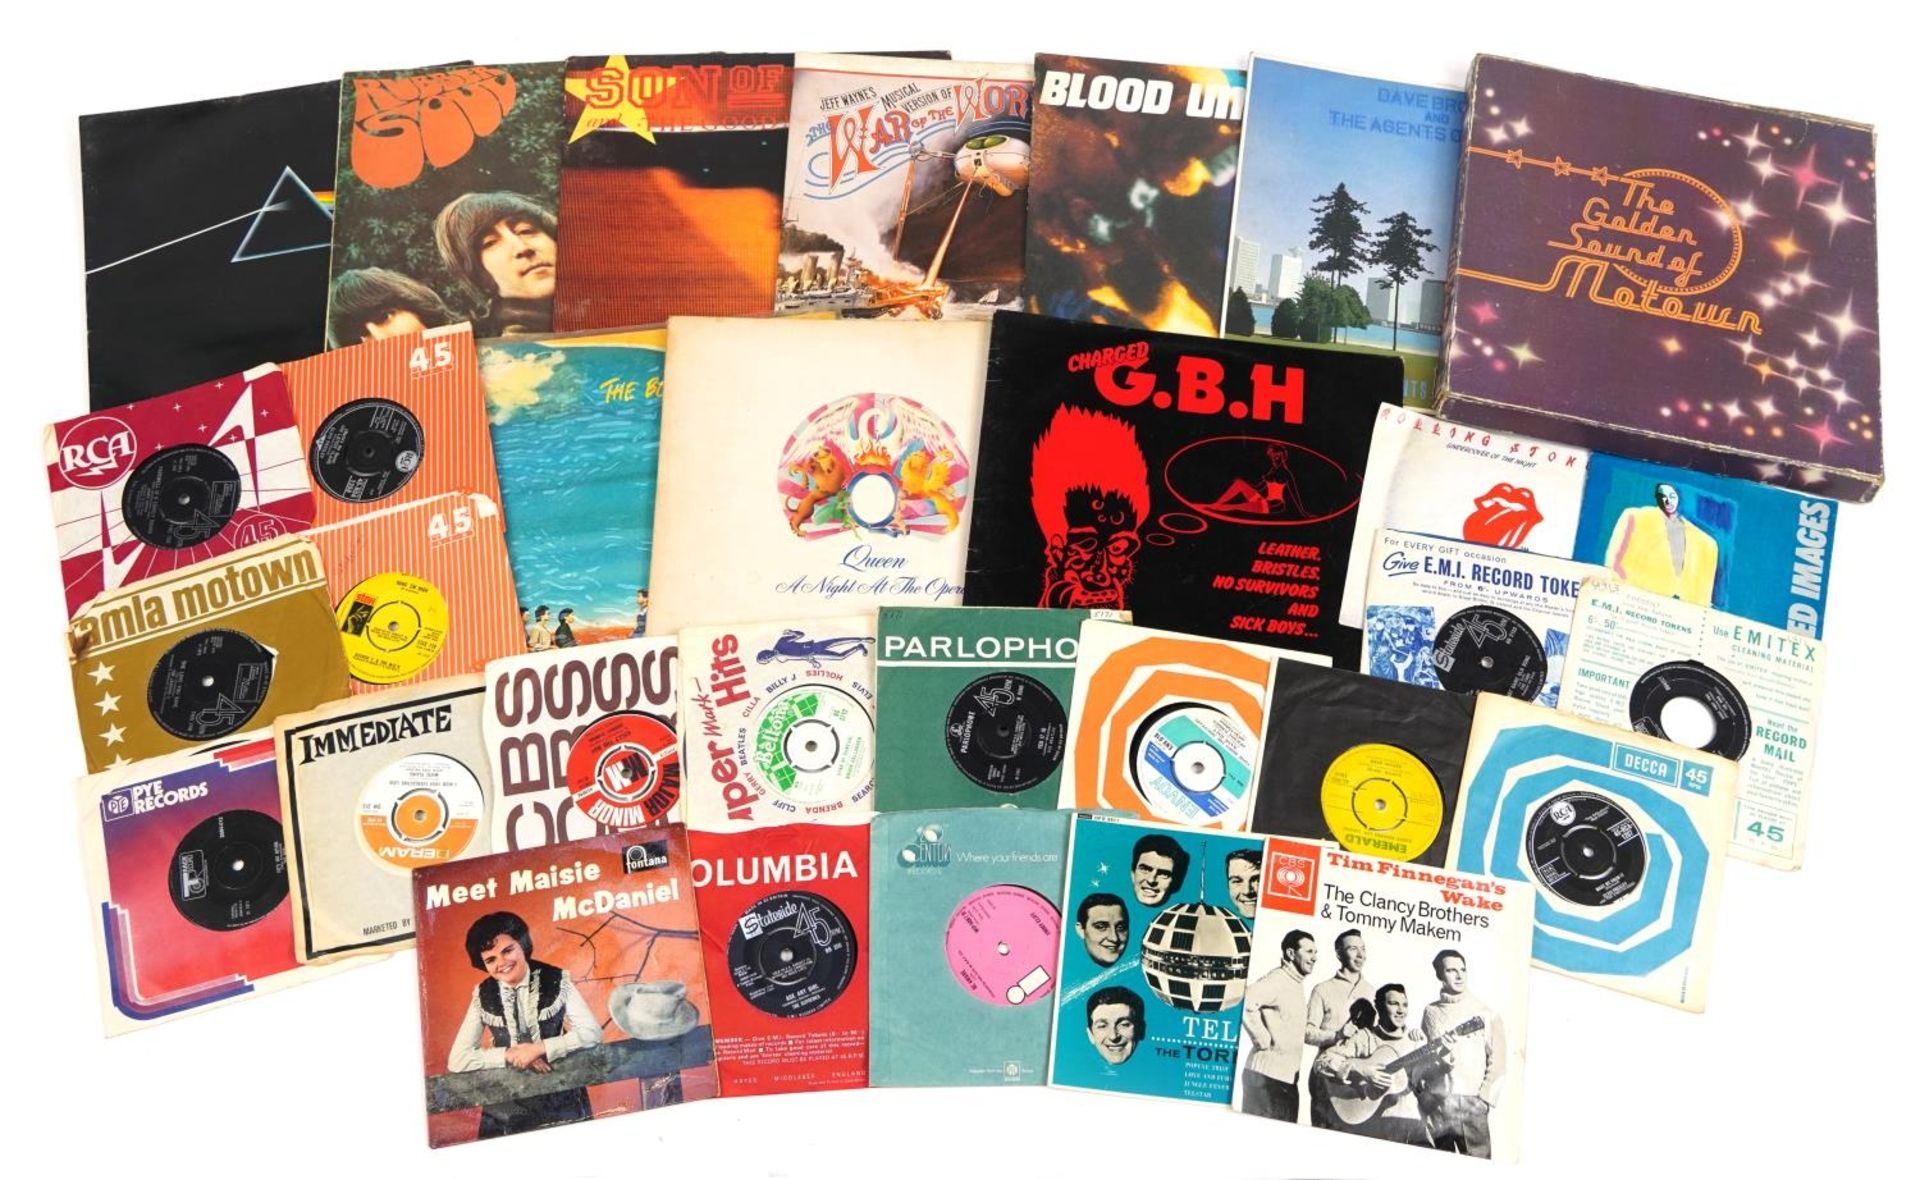 Vinyl LP records and 45rpms including The Beatles, Pink Floyd, Blood Uncles, The Agents of Chaos and